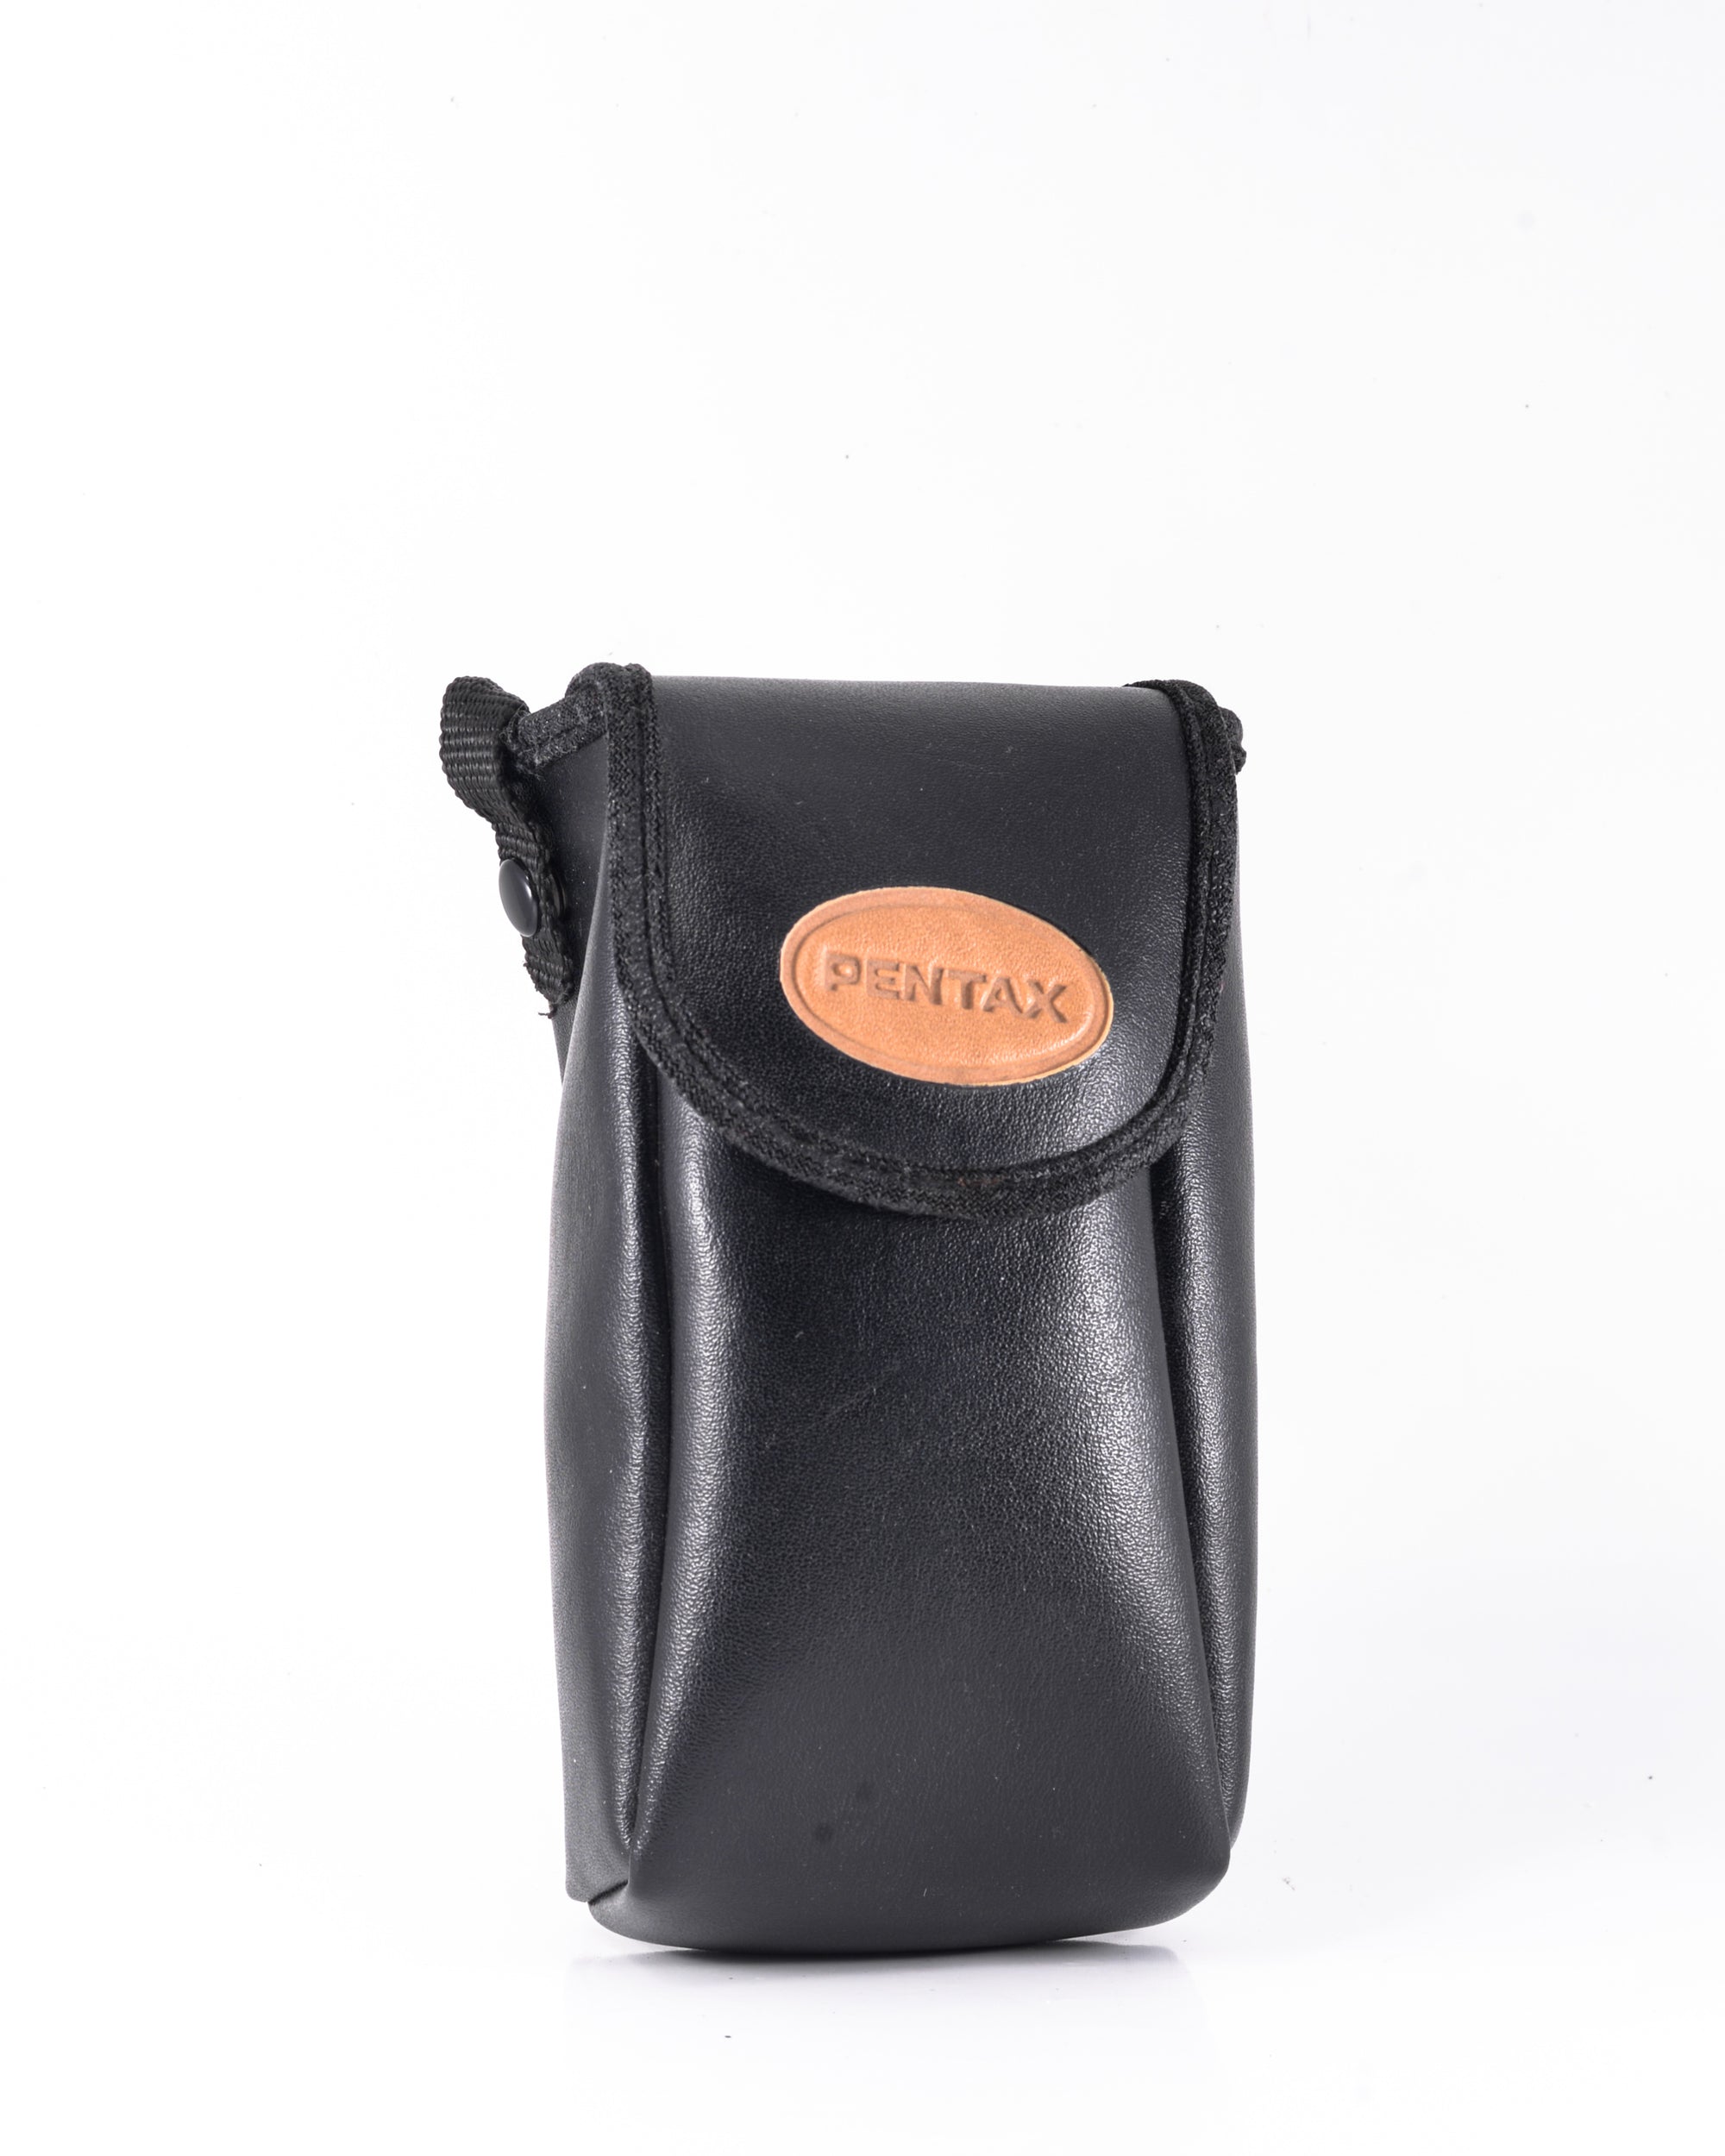 Vintage PENTAX Point & Shoot Pouch